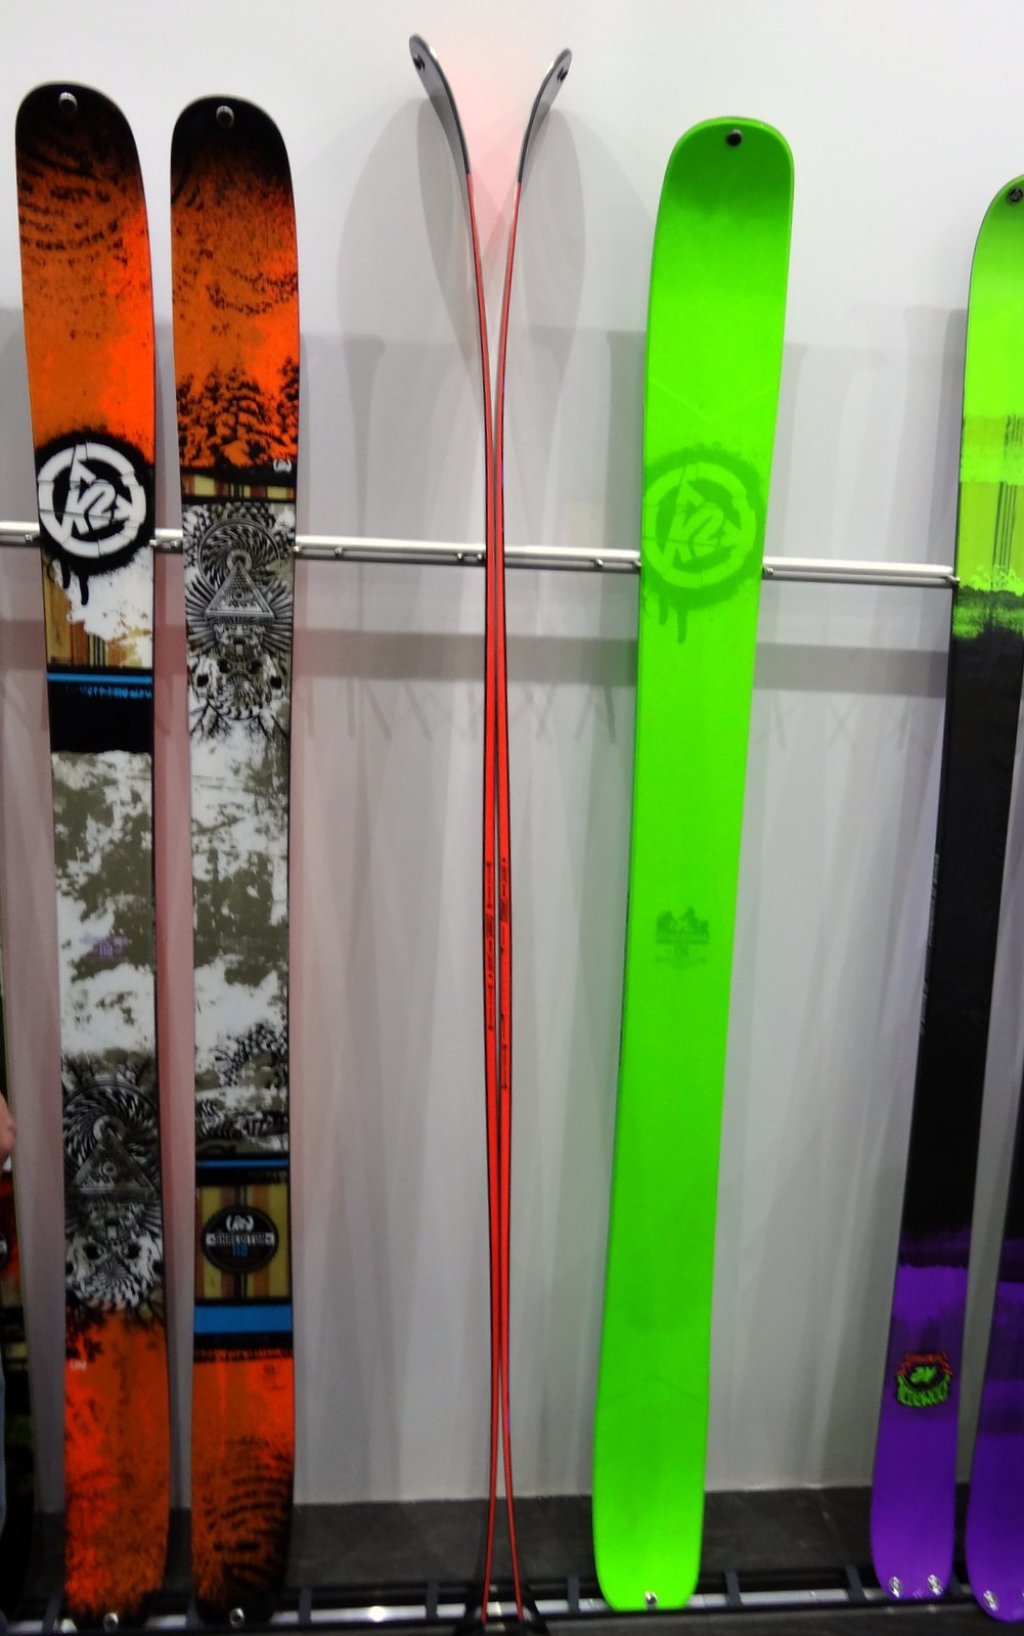 Shreditor 120 in profile, unchanged from the 13/14 model. With the green, wider model, K2 is another manufacturer (actually the same one) to bring a super-wide powder ski alongside Völkl. Is there perhaps a new trend emerging here after years of 115-120 mm skis?